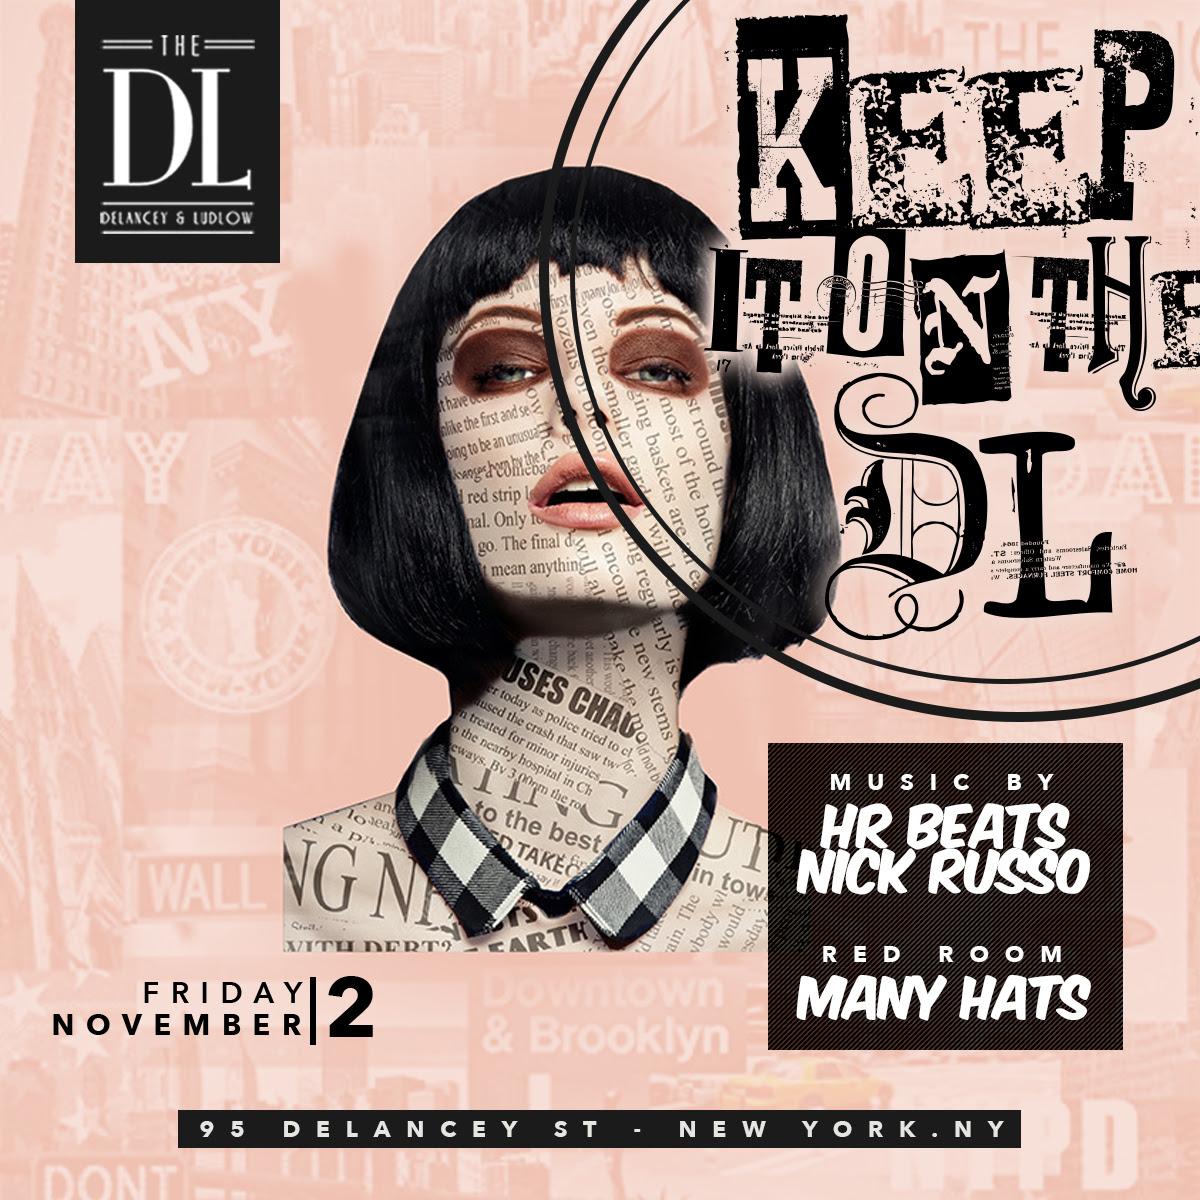 CANCELED UNTIL FURTHER NOTICE*****THE DL - Keep It On the DL FRIDAYS - FREE ENTRY